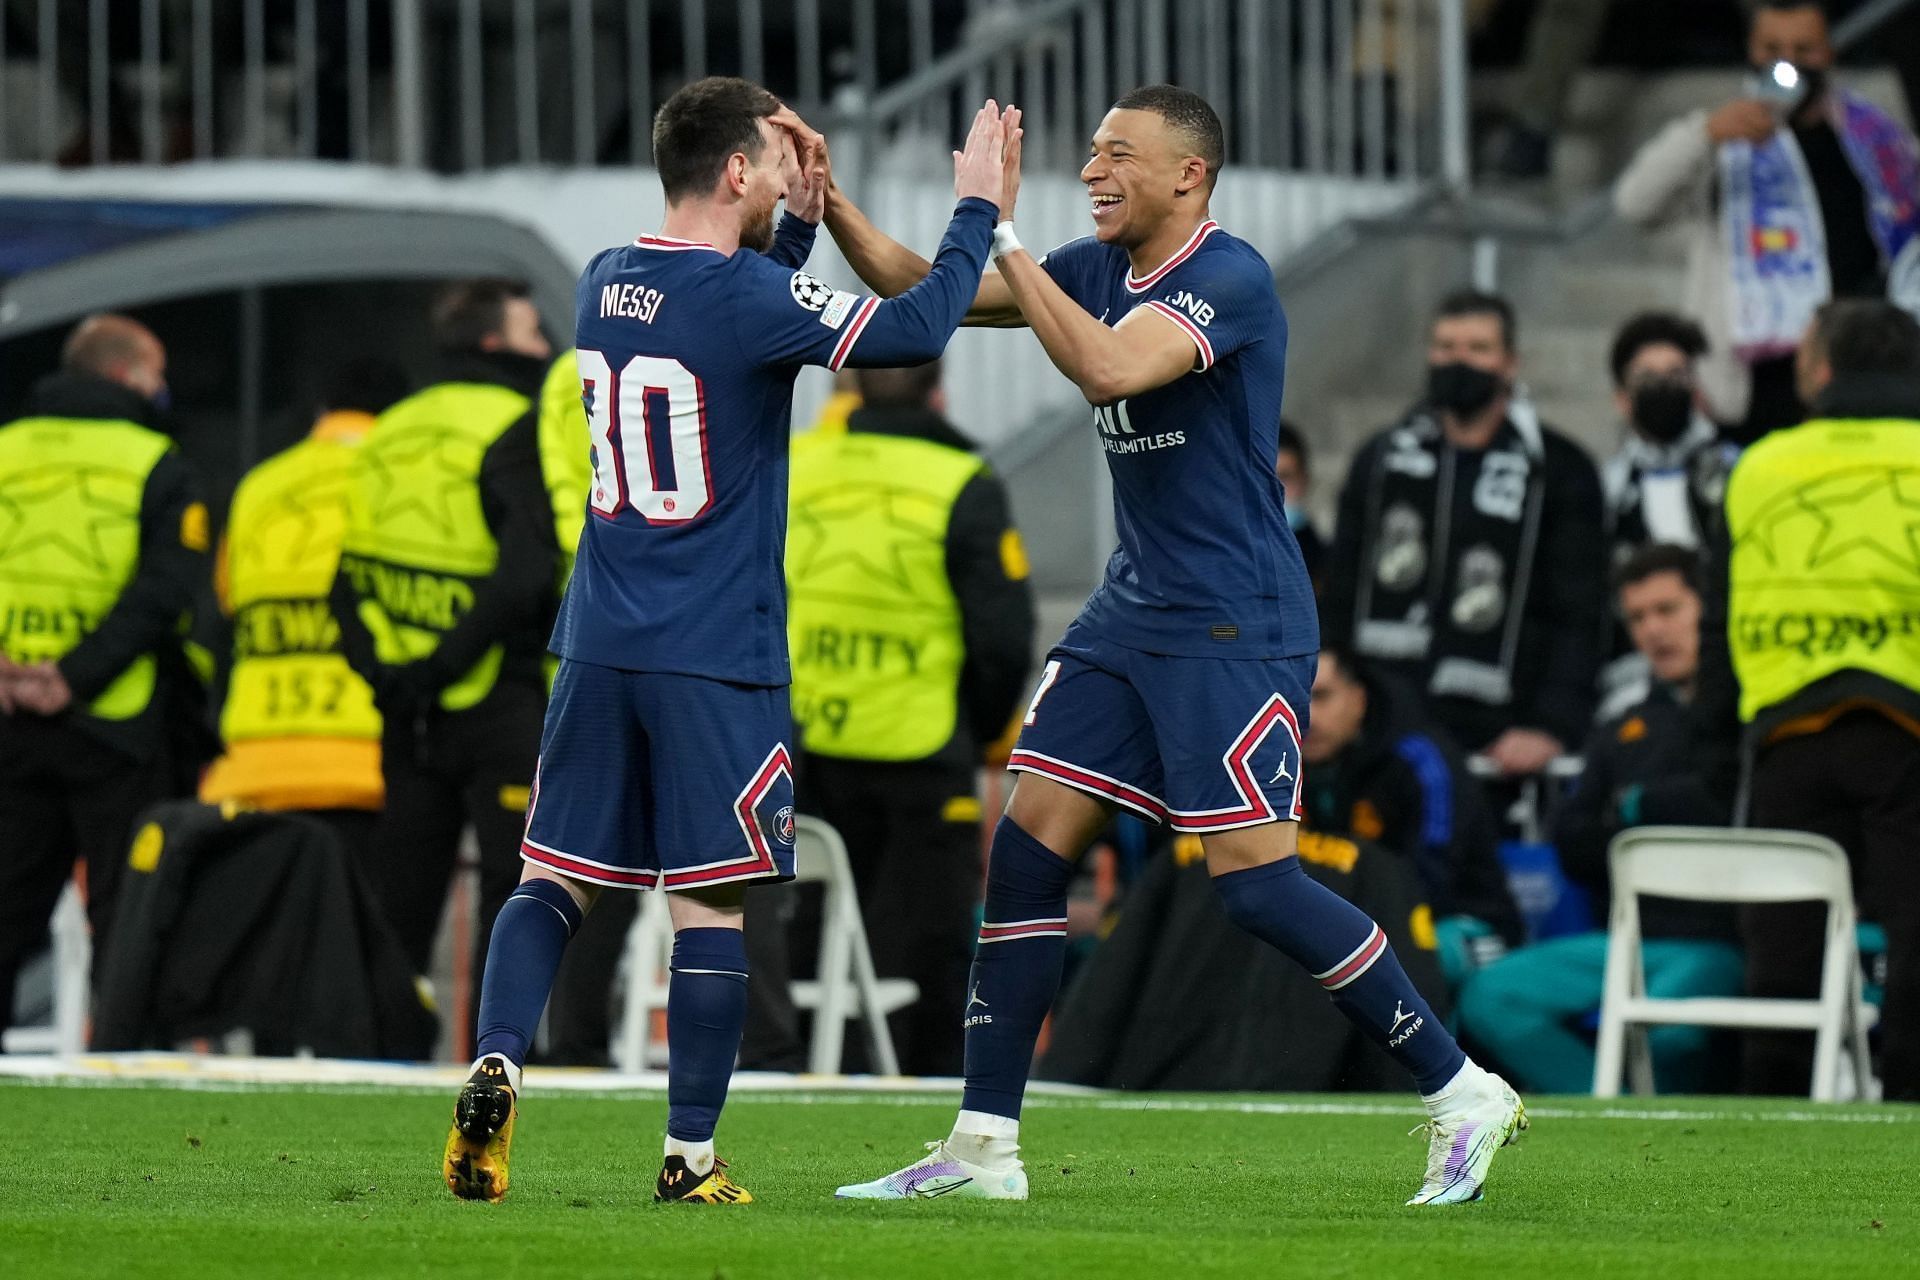 Mbappe and Messi fought to be the top dog at the Parc des Princes.